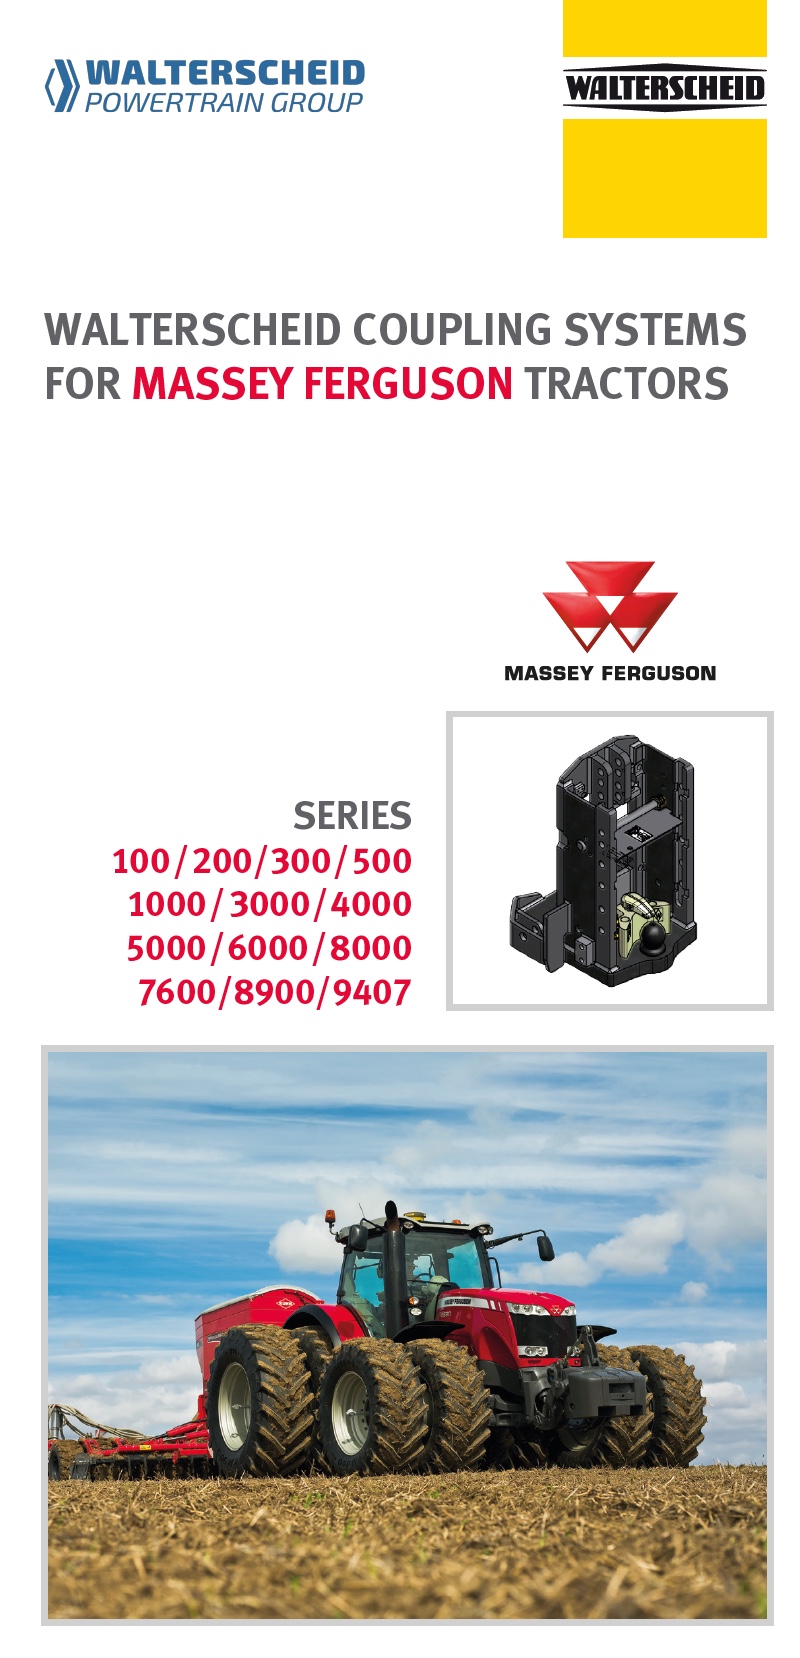 Coupling systems for Massey Ferguson tractors